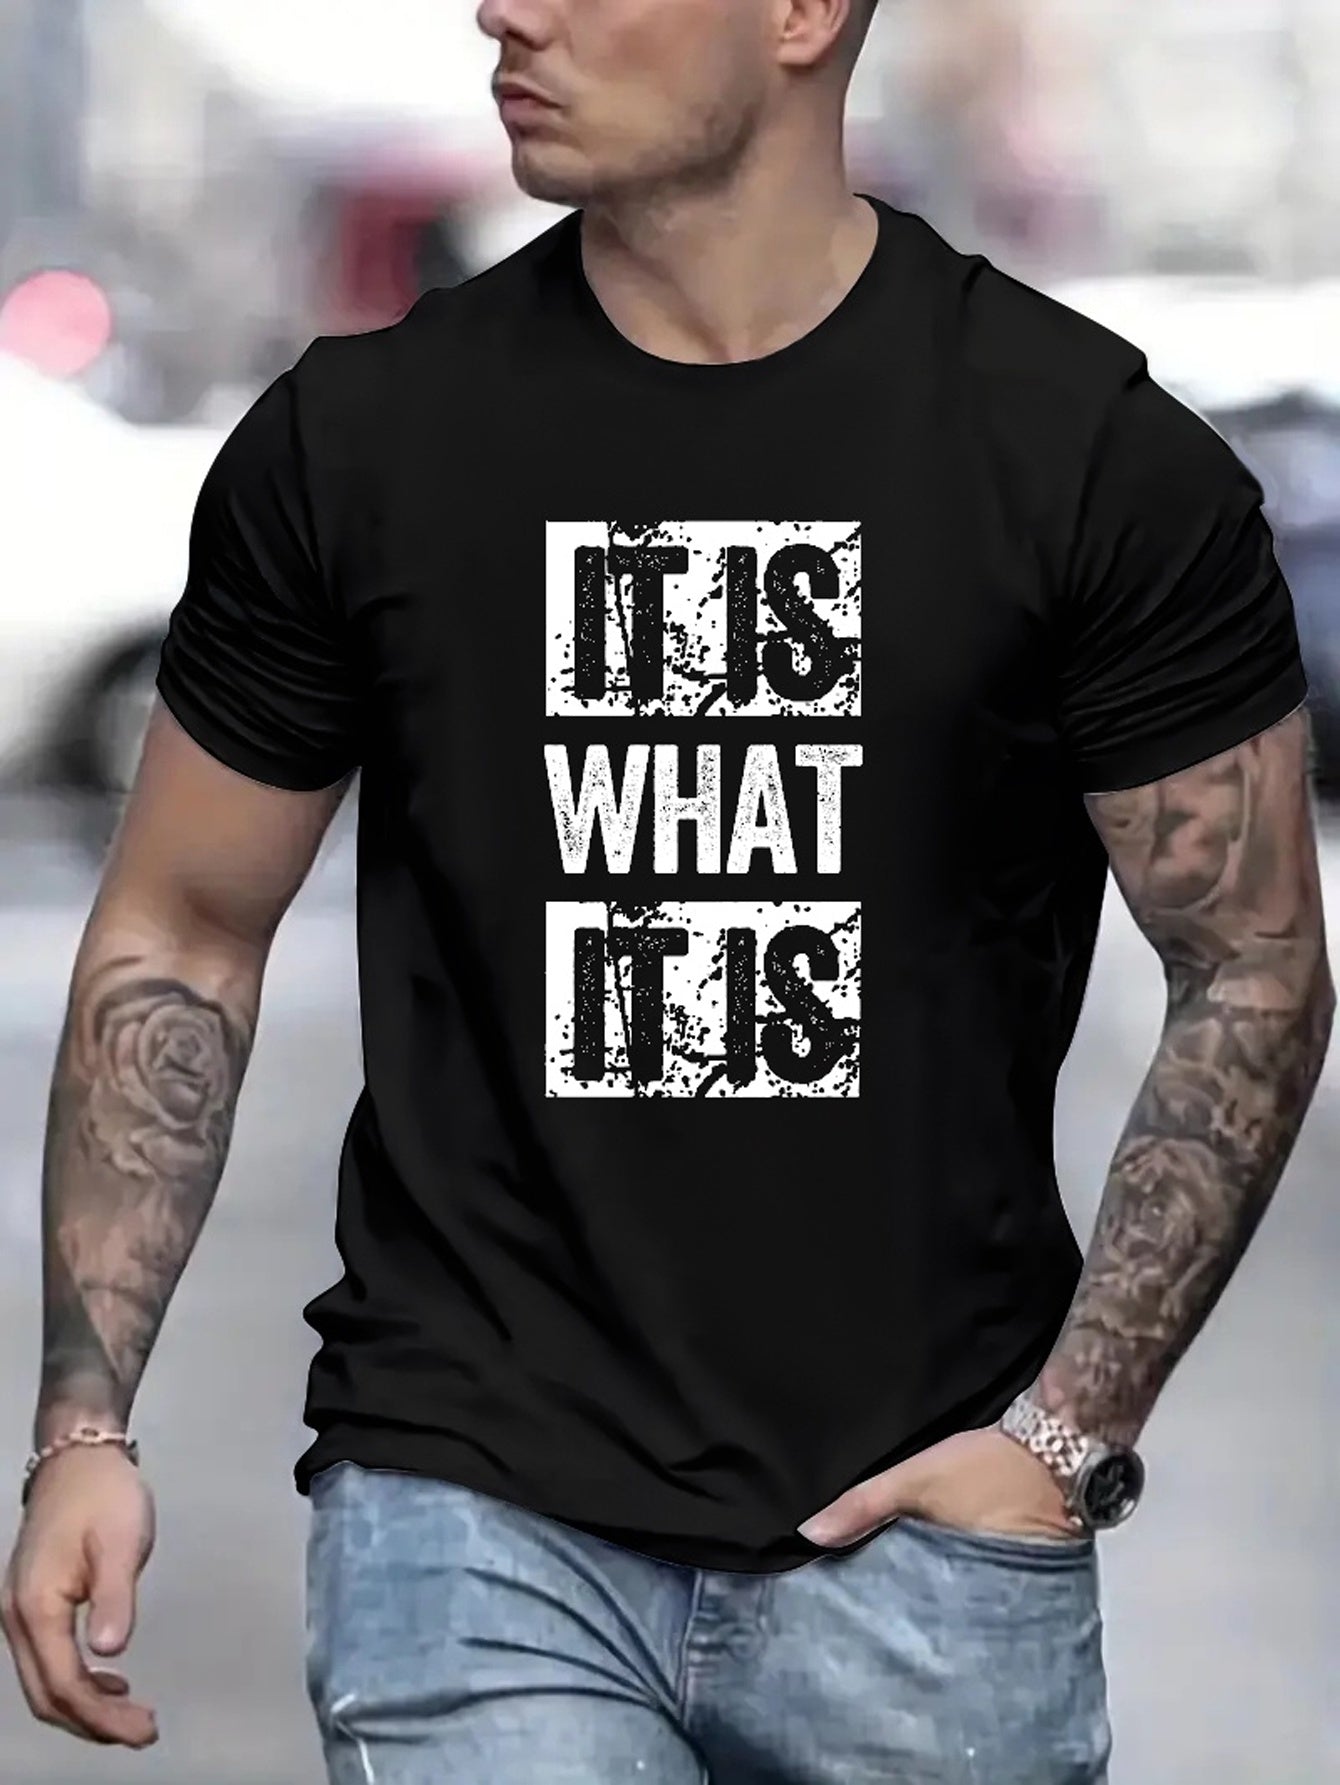 It Is What It Is Print T Shirt, Tees For Men, Casual Short Sleeve T-shirt For Summer